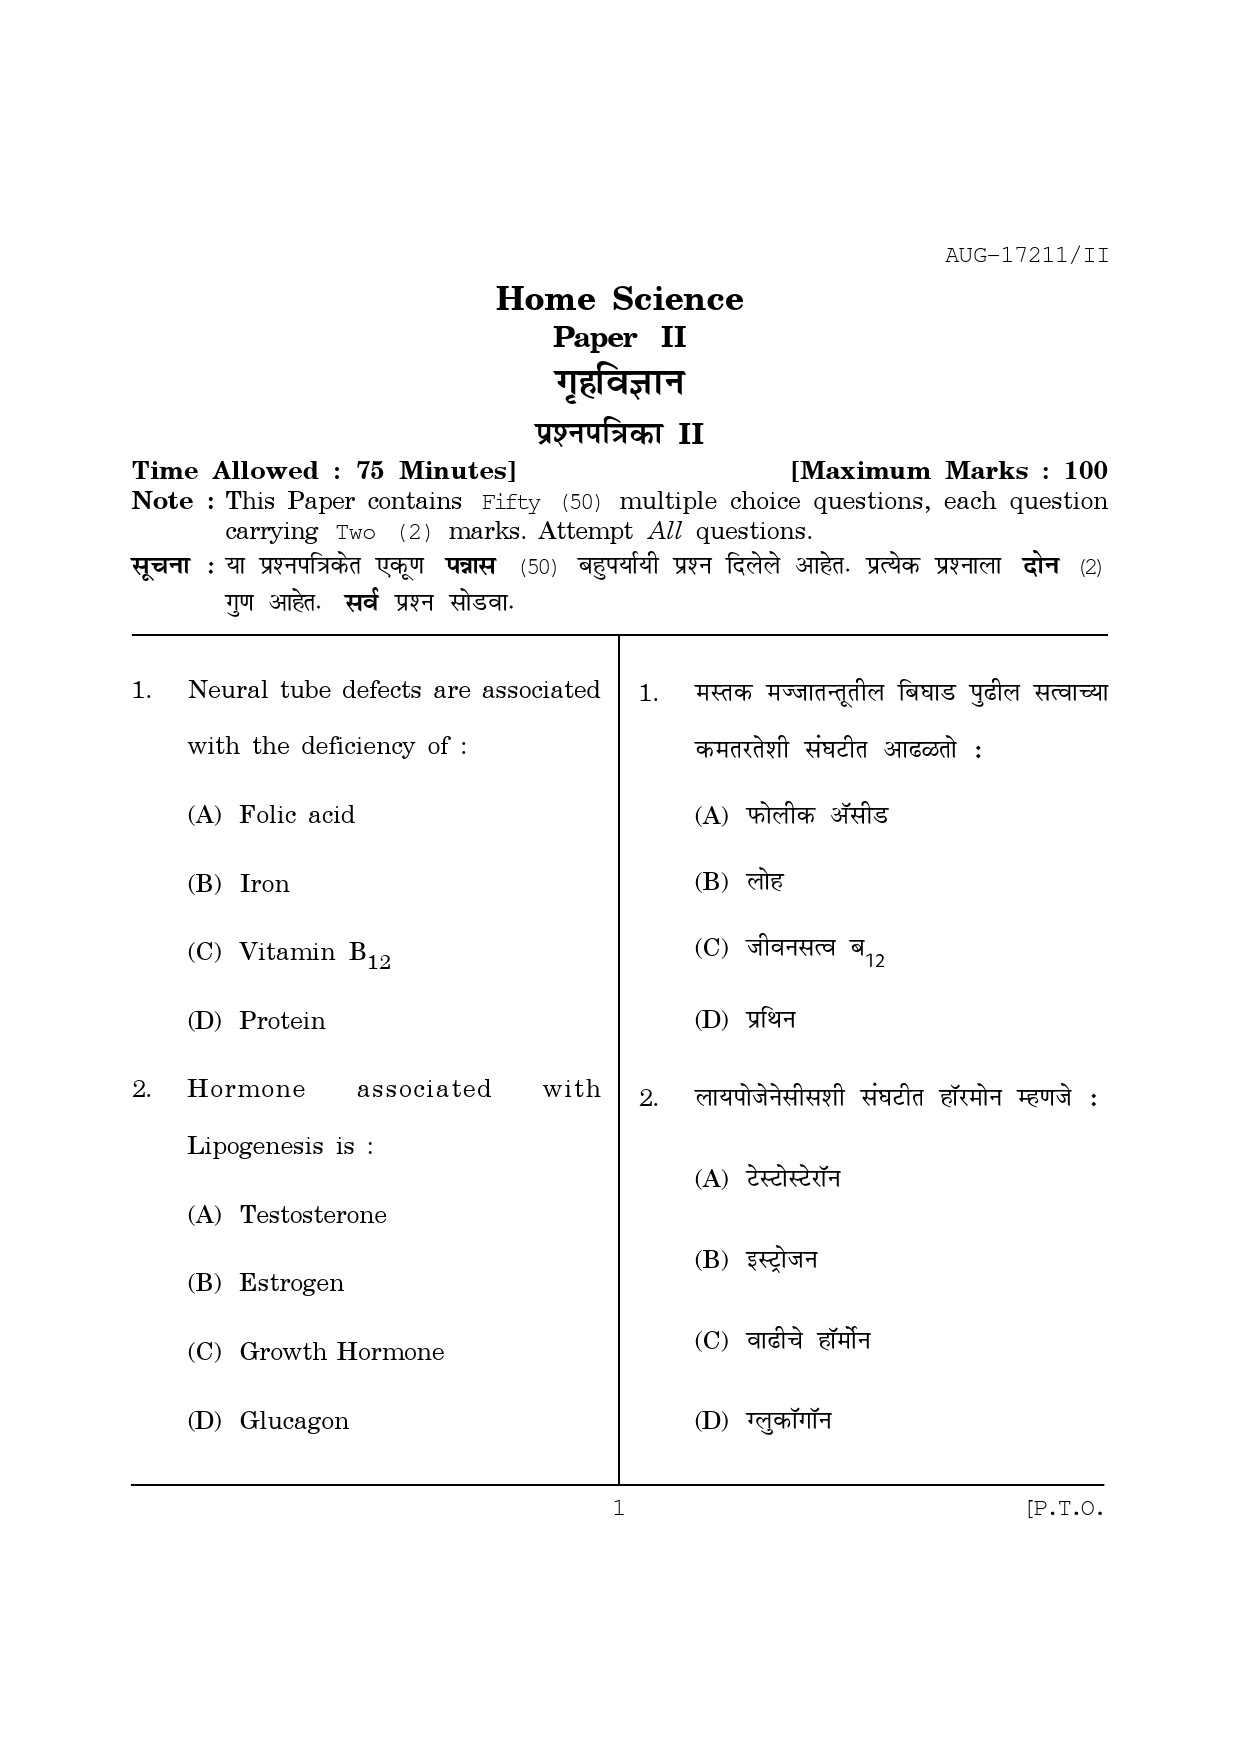 Maharashtra SET Home Science Question Paper II August 2011 1